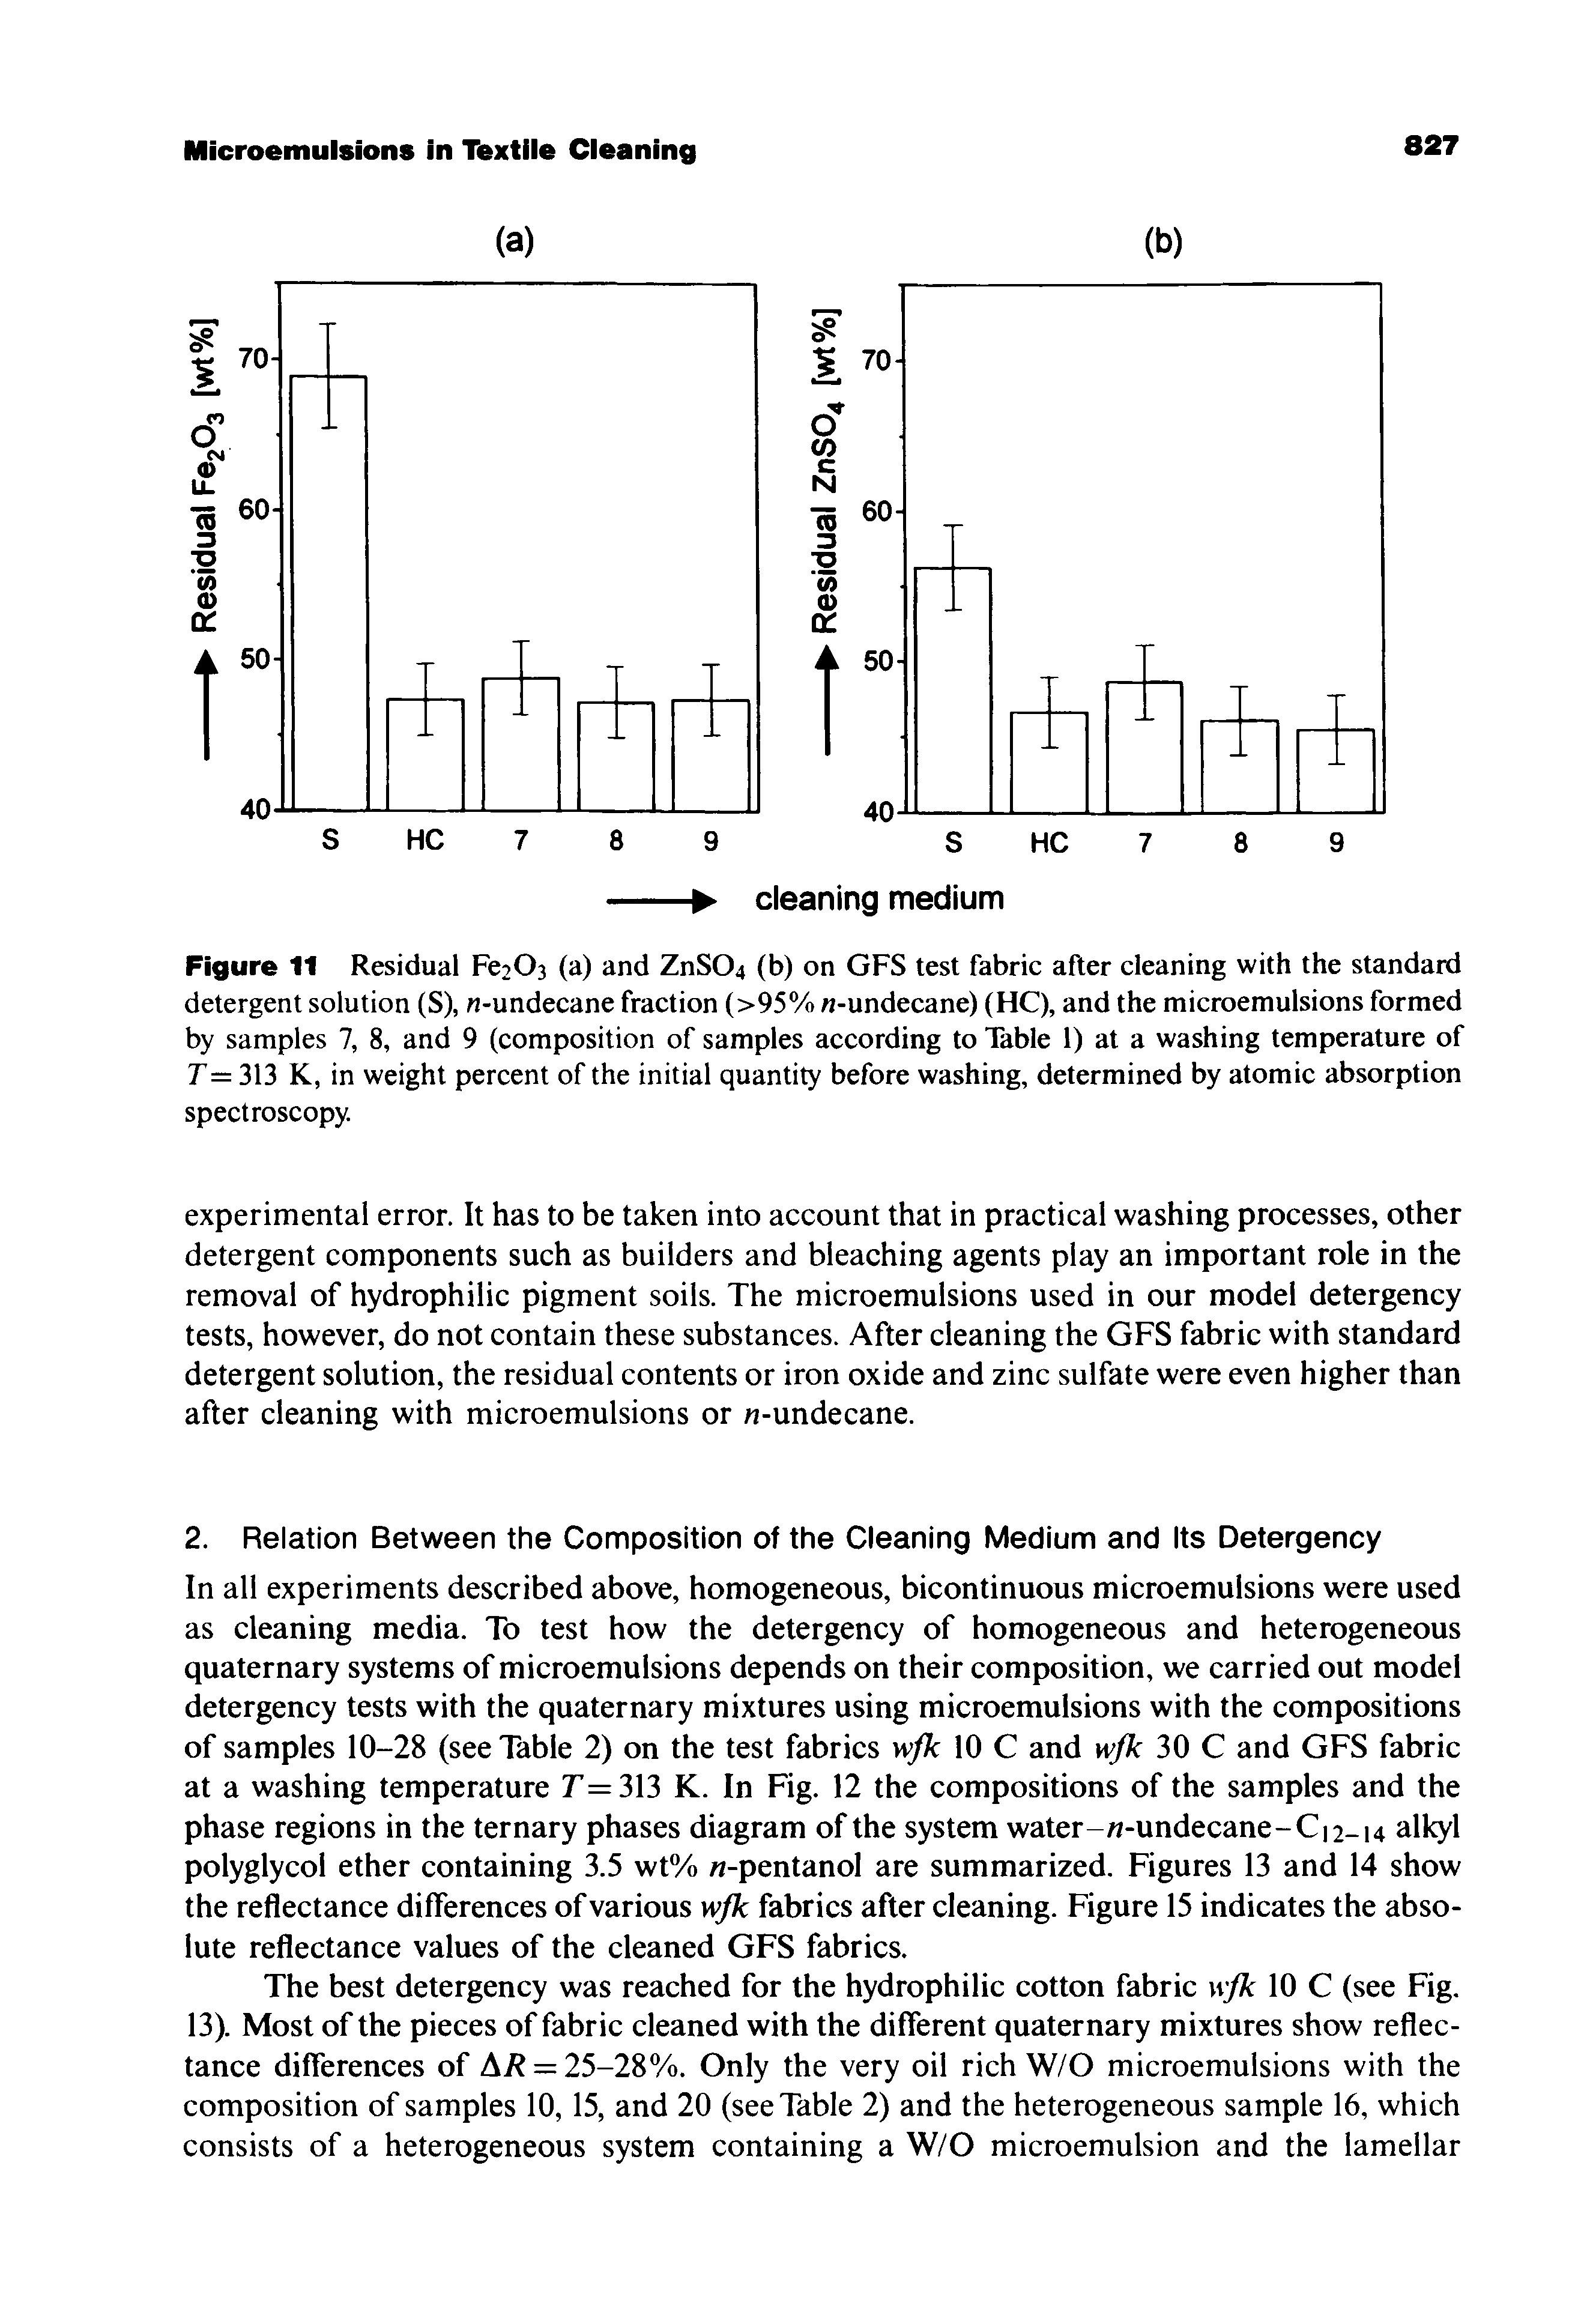 Figure 11 Residual Fe203 (a) and ZnS04 (b) on GFS test fabric after cleaning with the standard detergent solution (S), -undecane fraction (>95% -undecane) (HC), and the microemulsions formed by samples 7, 8, and 9 (composition of samples according to Table 1) at a washing temperature of T — 313 K, in weight percent of the initial quantity before washing, determined by atomic absorption spectroscopy.